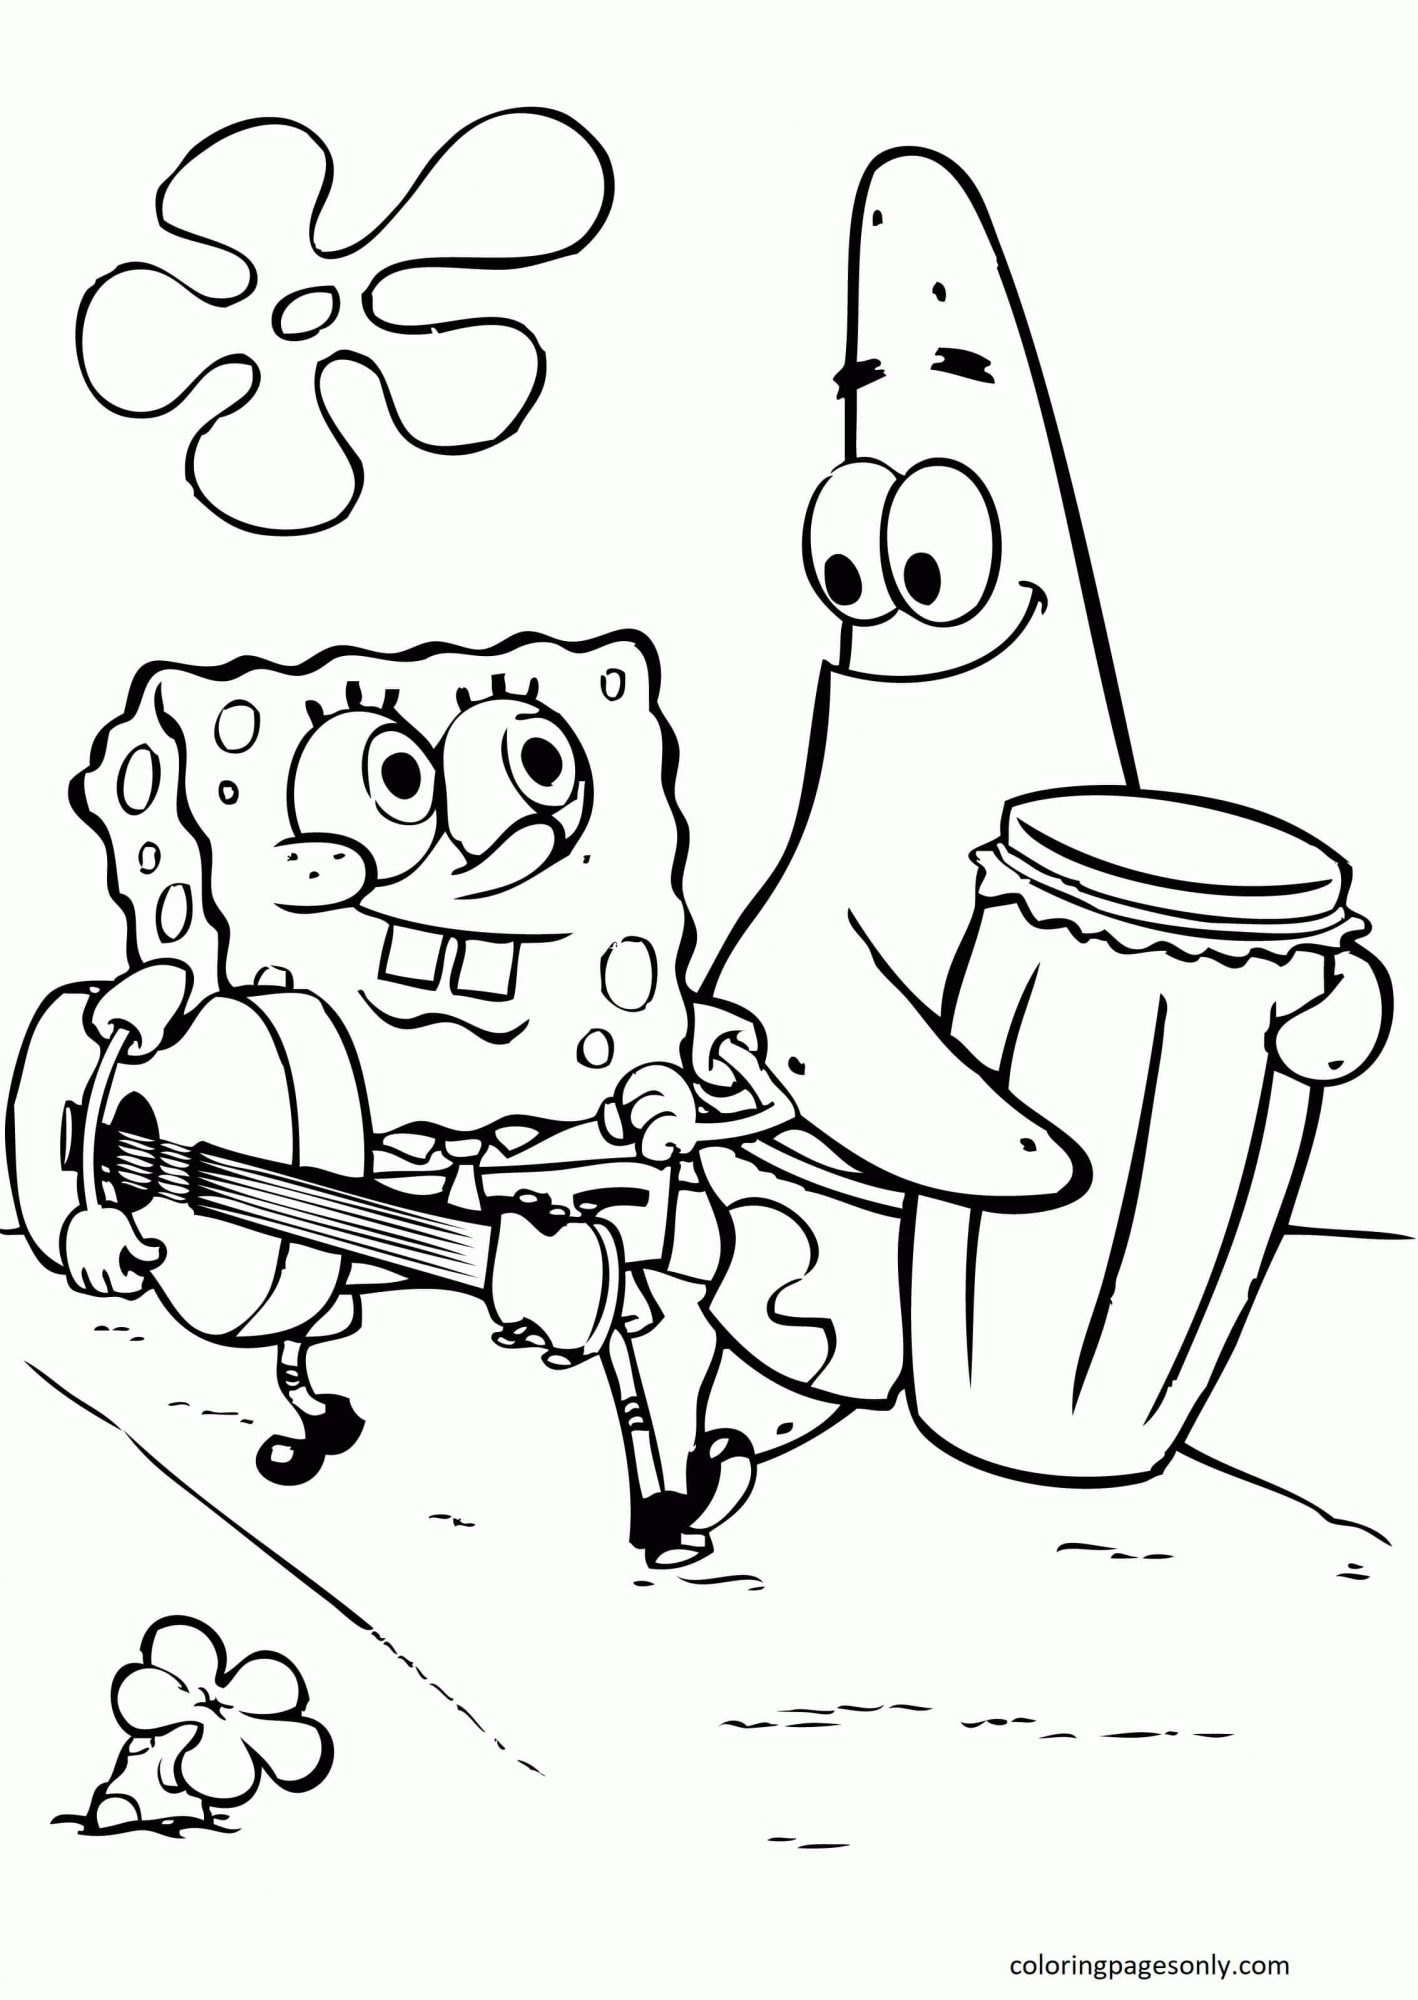 Spongebob And Friends 1 Coloring Page